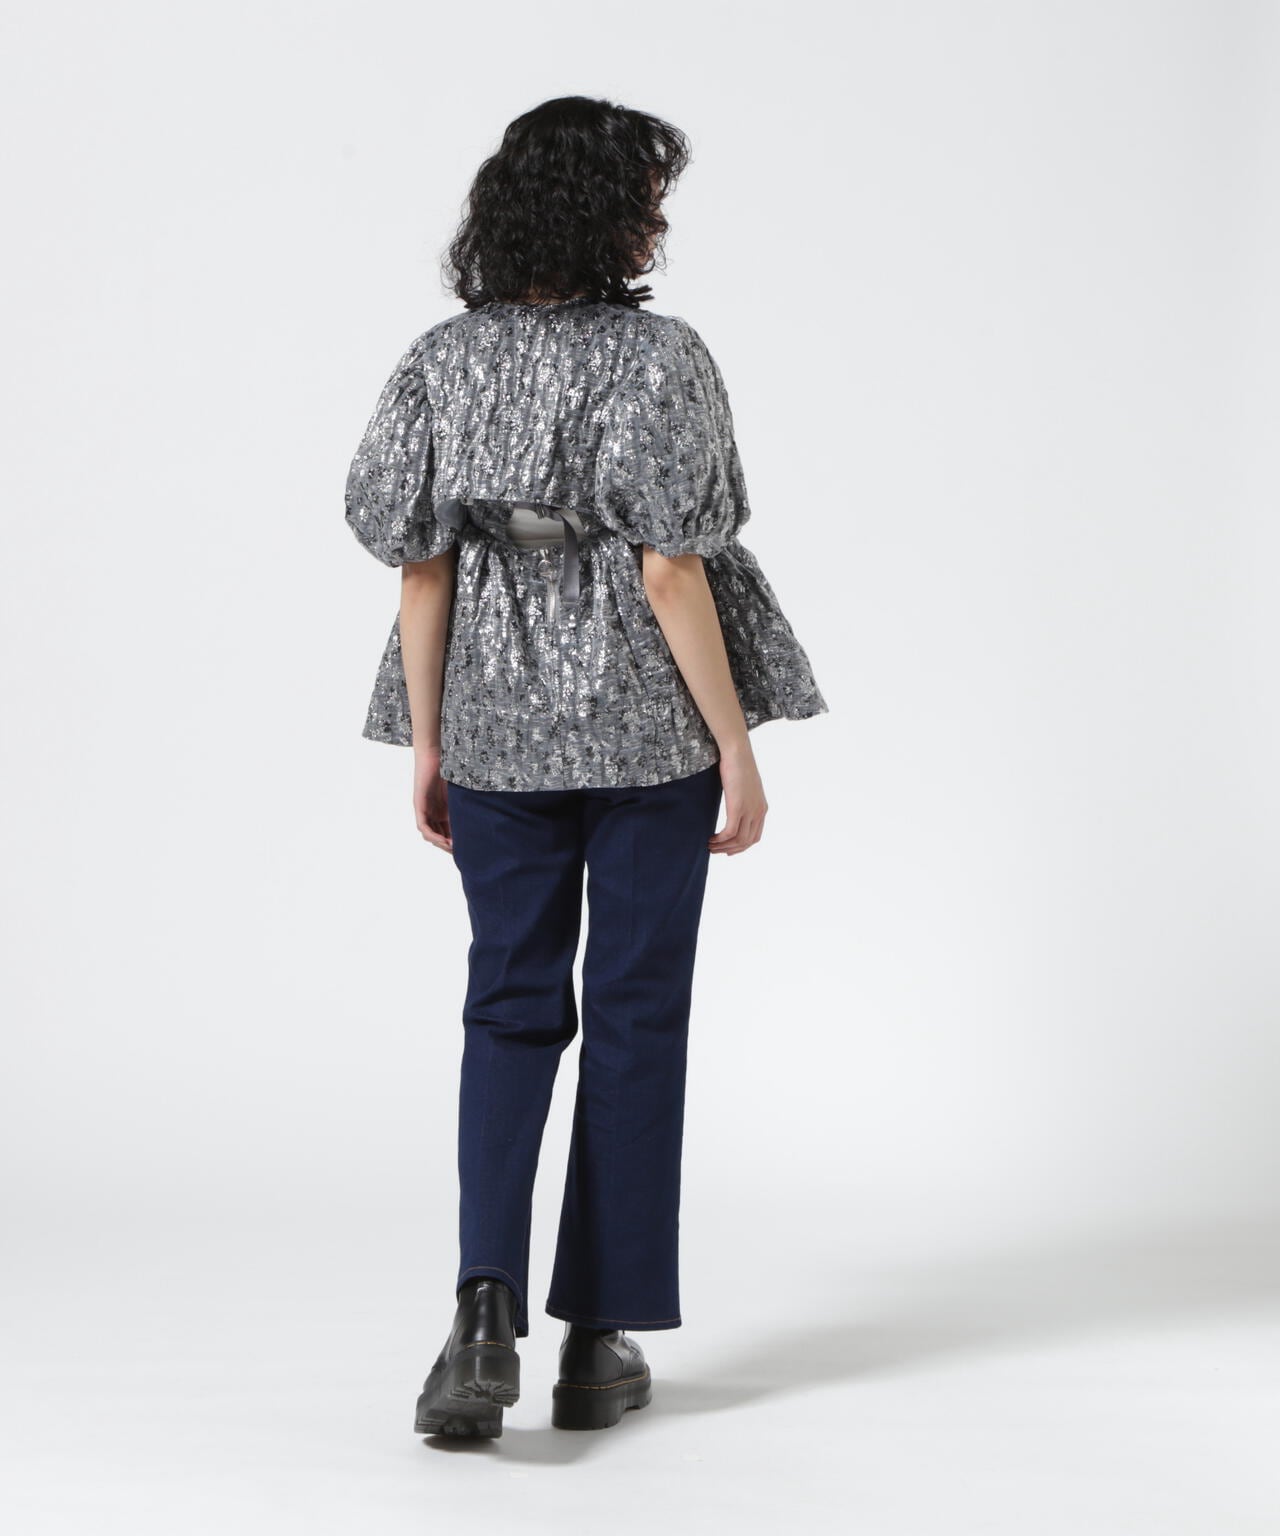 MAISON SPECIAL/Flower Jacquard Layering Tops | ROYAL FLASH 